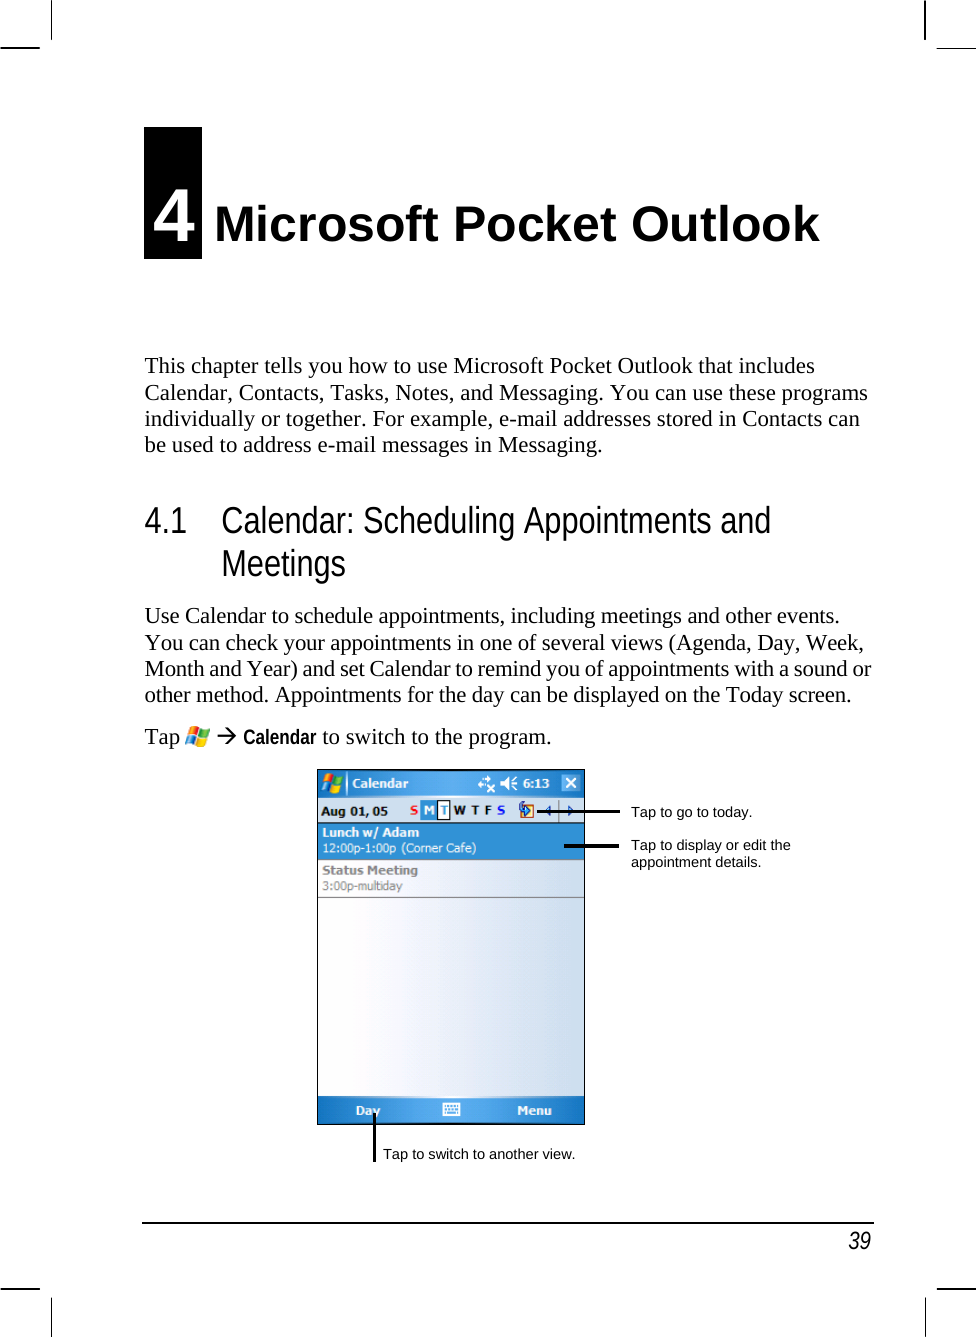   39 4 Microsoft Pocket Outlook This chapter tells you how to use Microsoft Pocket Outlook that includes Calendar, Contacts, Tasks, Notes, and Messaging. You can use these programs individually or together. For example, e-mail addresses stored in Contacts can be used to address e-mail messages in Messaging. 4.1 Calendar: Scheduling Appointments and Meetings Use Calendar to schedule appointments, including meetings and other events. You can check your appointments in one of several views (Agenda, Day, Week, Month and Year) and set Calendar to remind you of appointments with a sound or other method. Appointments for the day can be displayed on the Today screen. Tap  Æ Calendar to switch to the program.             Tap to go to today. Tap to display or edit the appointment details. Tap to switch to another view.